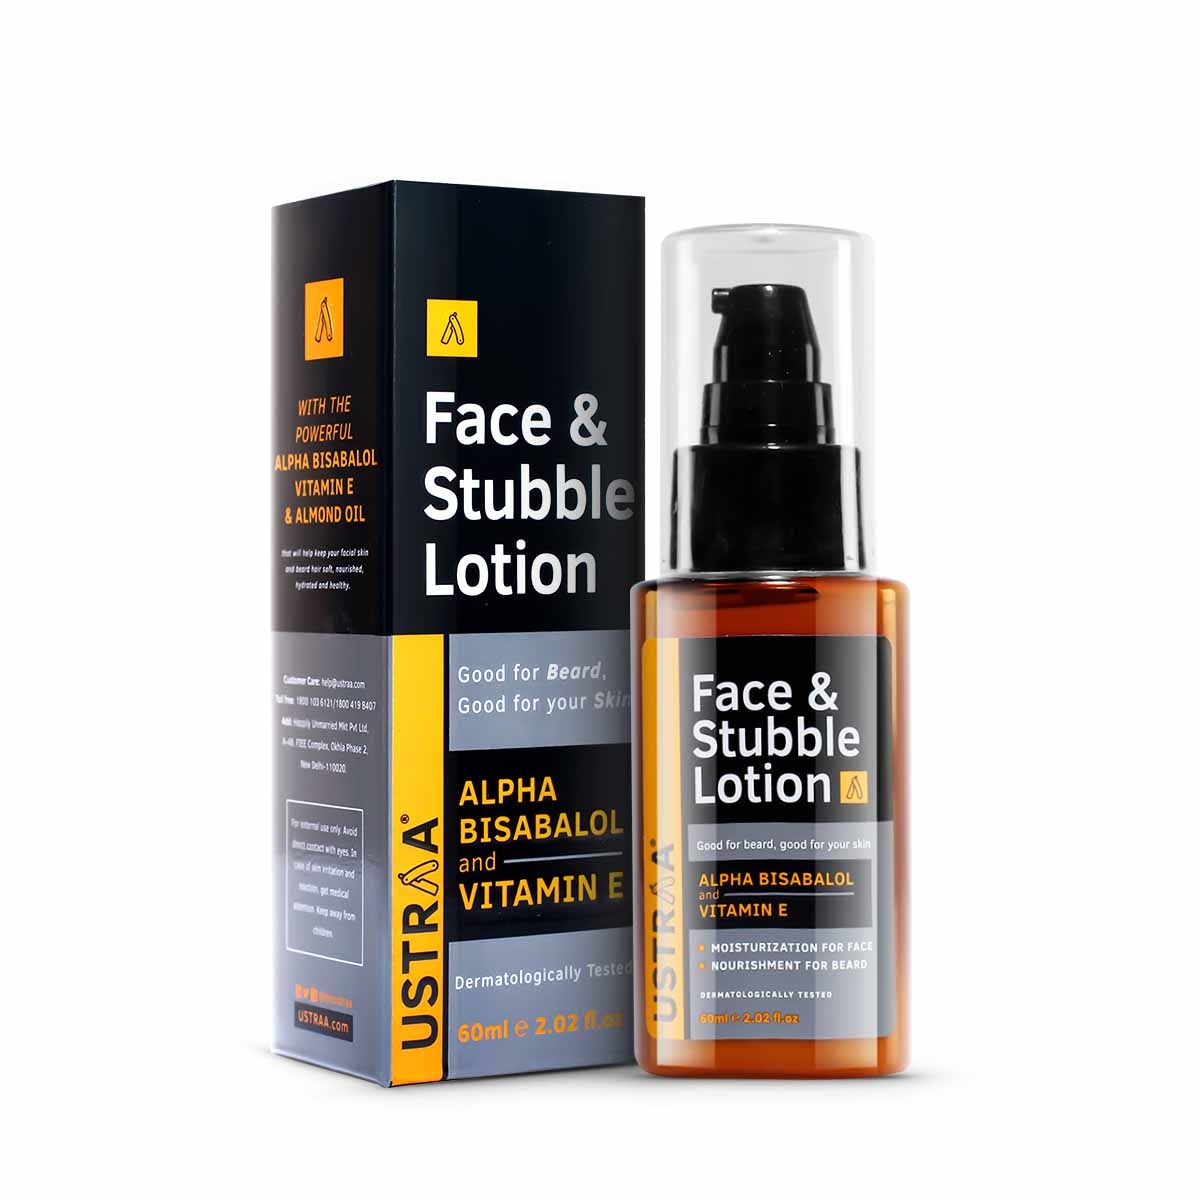 Ustraa Face & Stubble Lotion 60 ml - For Beard Softening, Dermatologically Tested, With Vitamin E & Almond Oil, No Mineral Oils, No Silicones, No Parabens